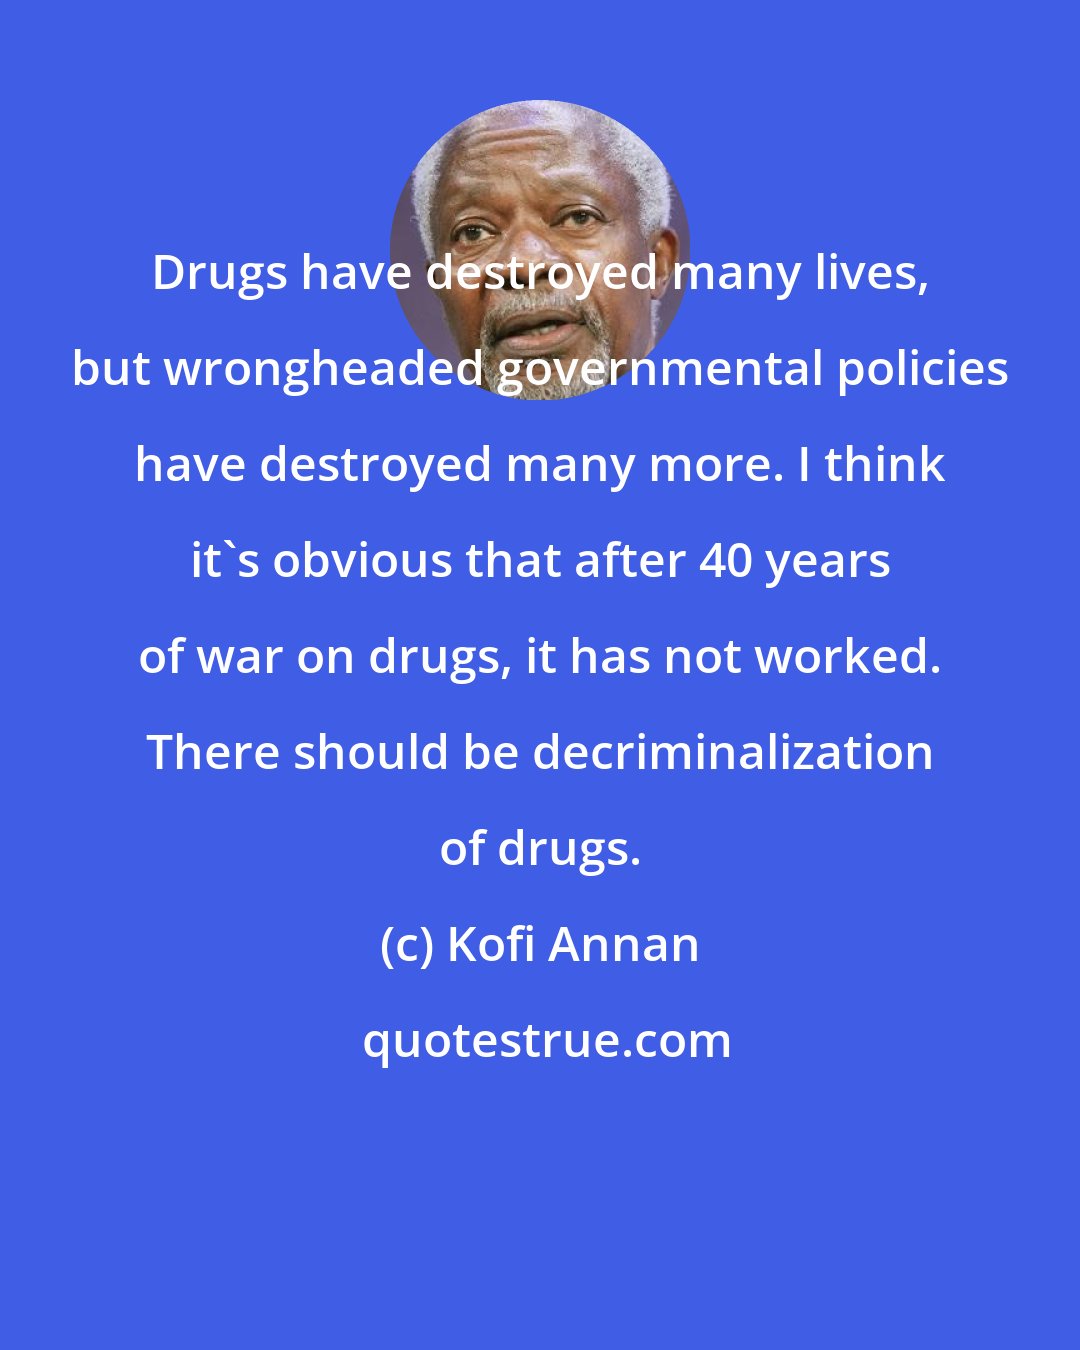 Kofi Annan: Drugs have destroyed many lives, but wrongheaded governmental policies have destroyed many more. I think it's obvious that after 40 years of war on drugs, it has not worked. There should be decriminalization of drugs.